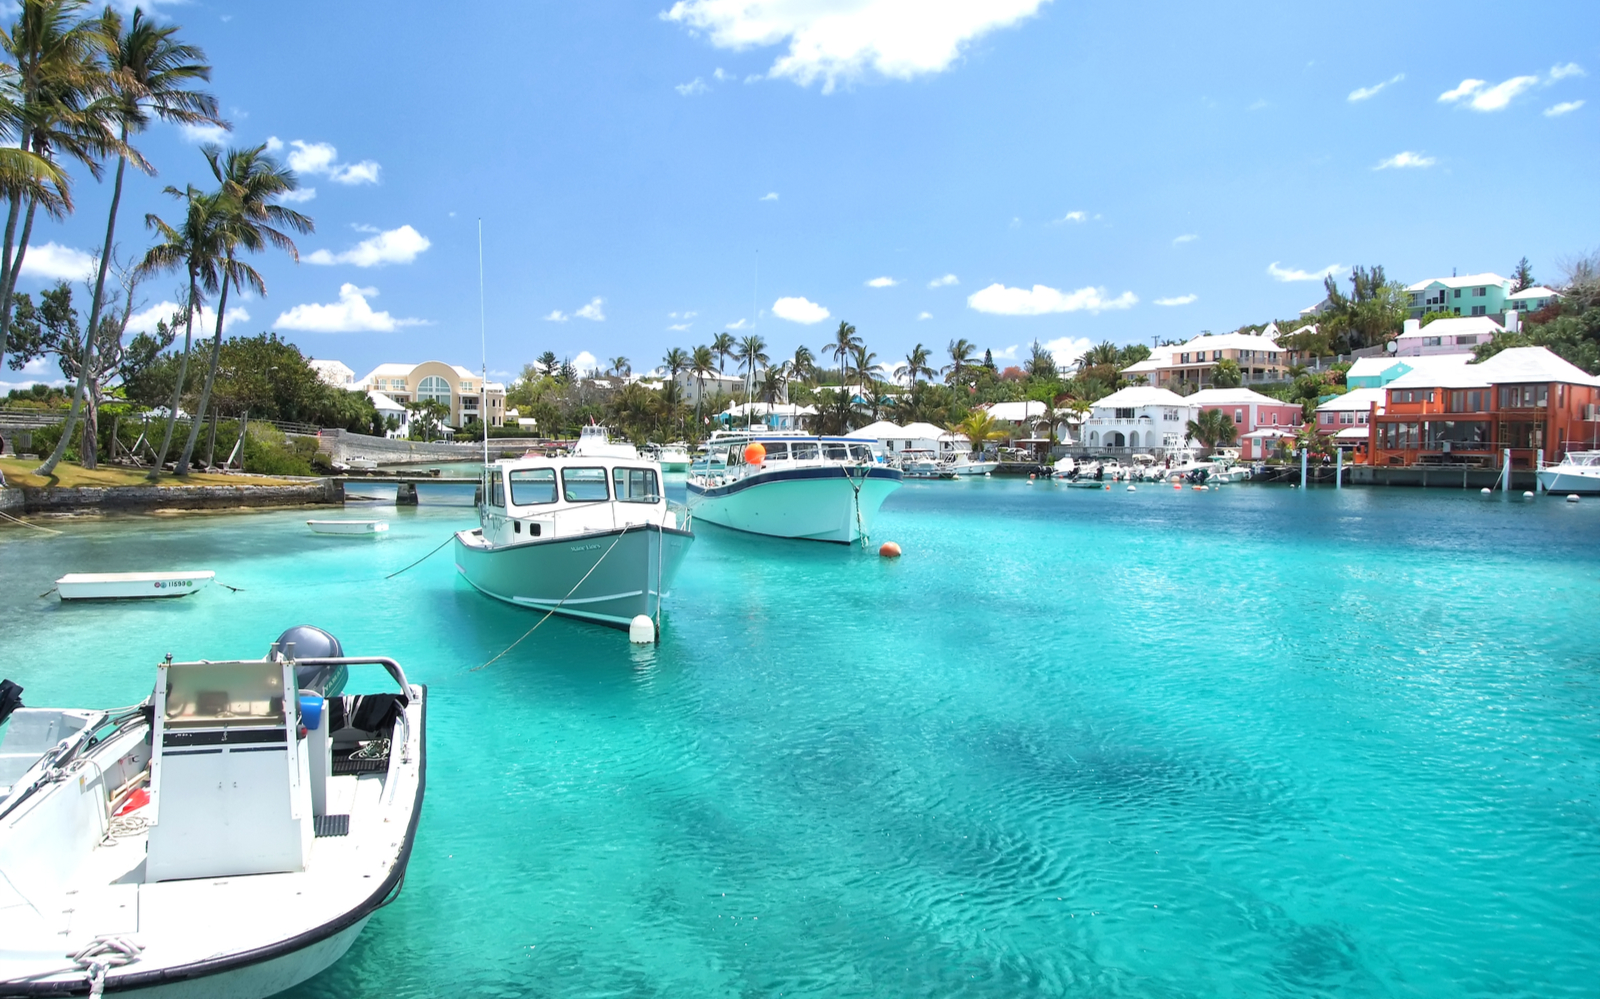 The Best Time to Visit Bermuda in 2022